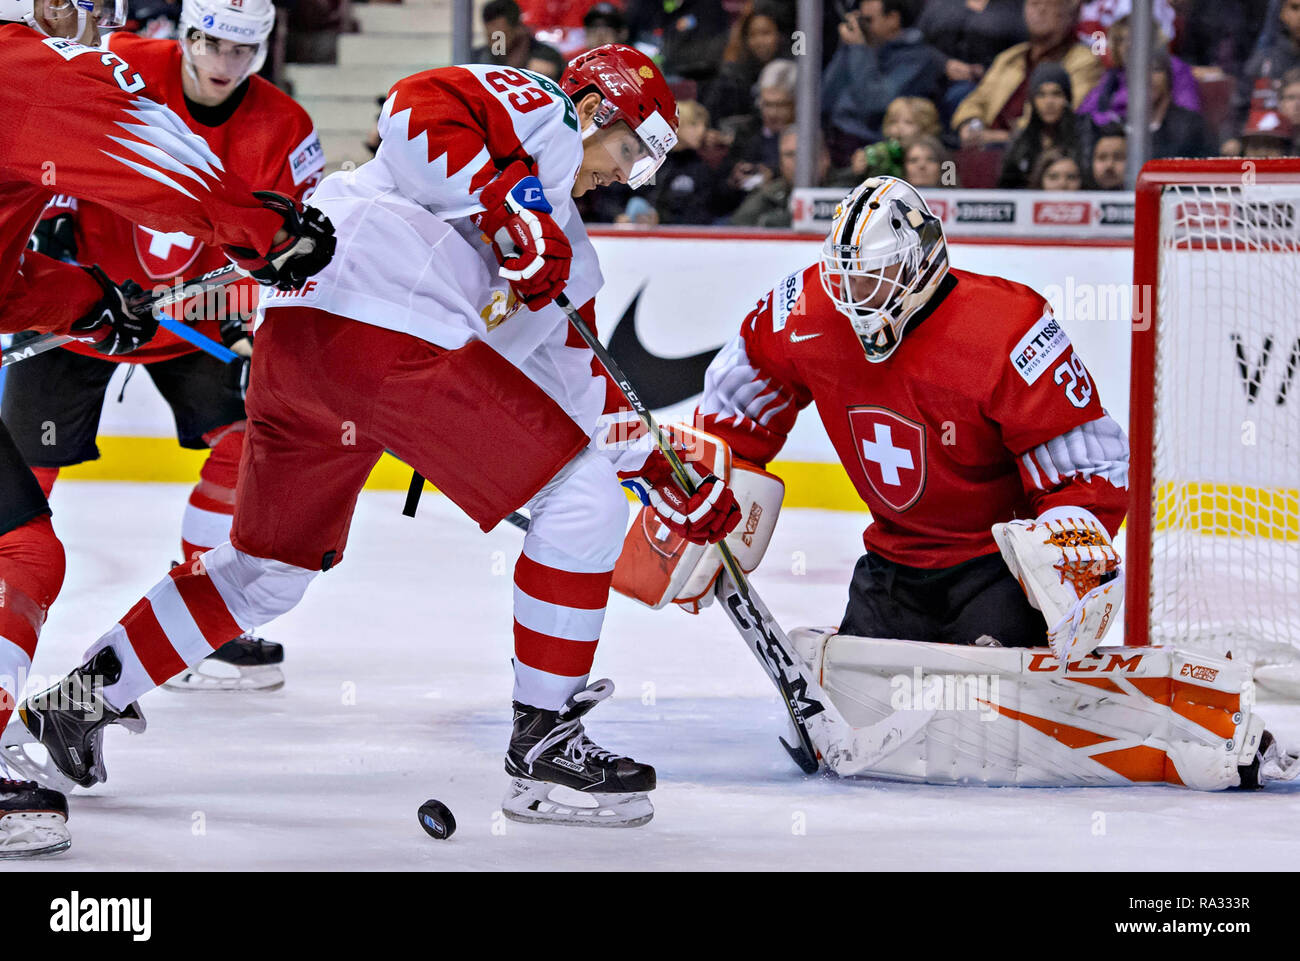 Vancouver. 27th Dec, 2018. Switzerland's goalie Akira Schmid stops the puck  during the match against Canada at the IIHF World Junior Championships in  Vancouver, Dec. 27, 2018. Canada won the preliminary match